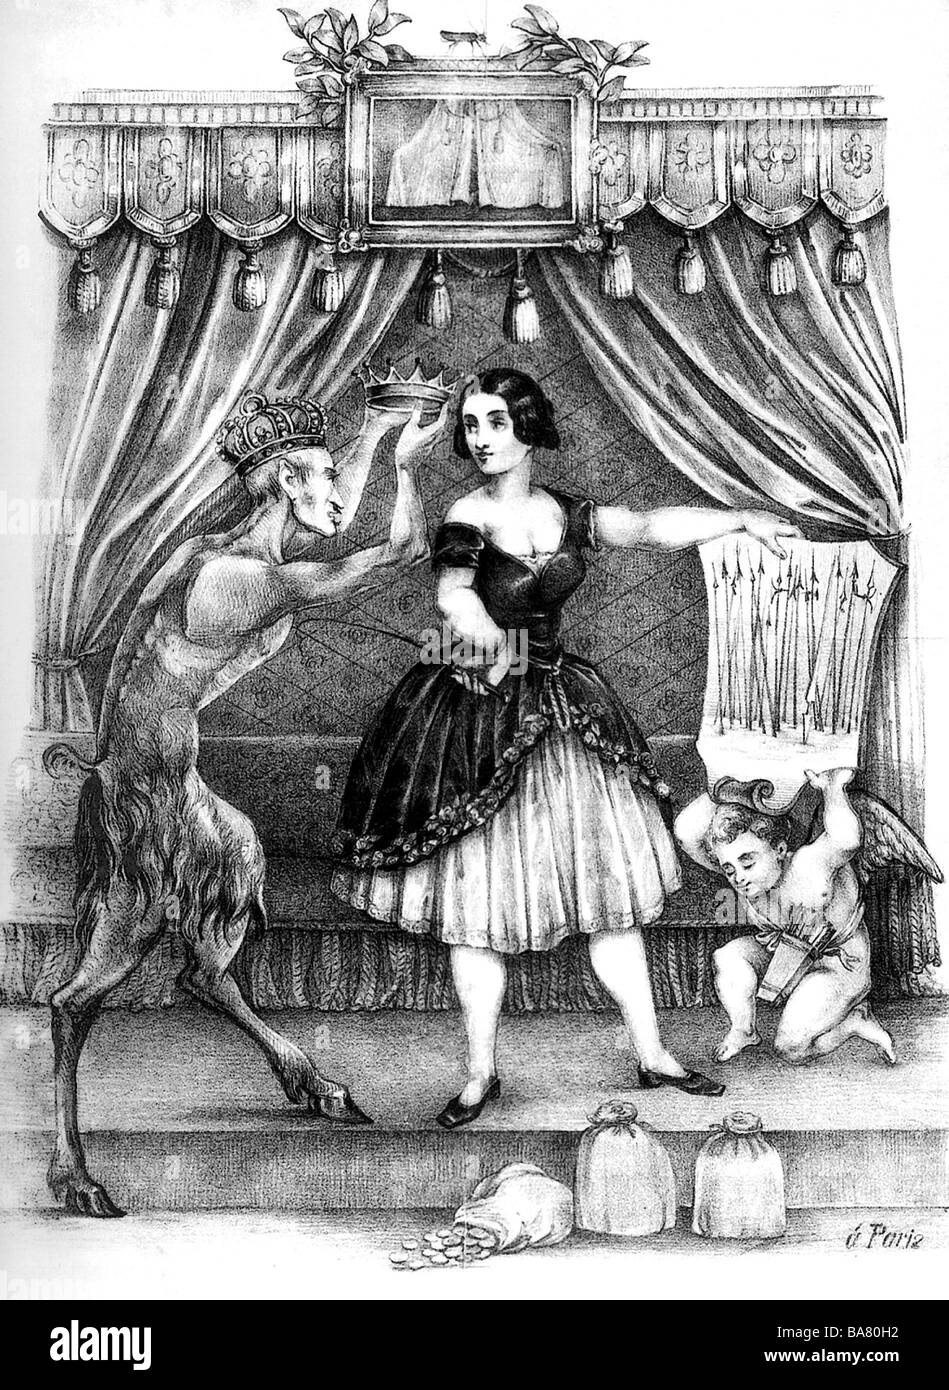 Montez, Lola, 17.2.1821 - 17.1.1861, Irish dancer, caricature on gathering to princess of Landsfeld by King Louis I of Bavaria, lithograph by Wilhelm Starck, 1847, birth name: Marie Dolores Gilbert, lover, mistress of King Louis I of Bavaria 1846 - 1848, 'Femme Fatale', dance, dancing, angel, coat of arms, riding crop, putto, politics, Wittelsbach, money sacks, buck, full length, , Stock Photo